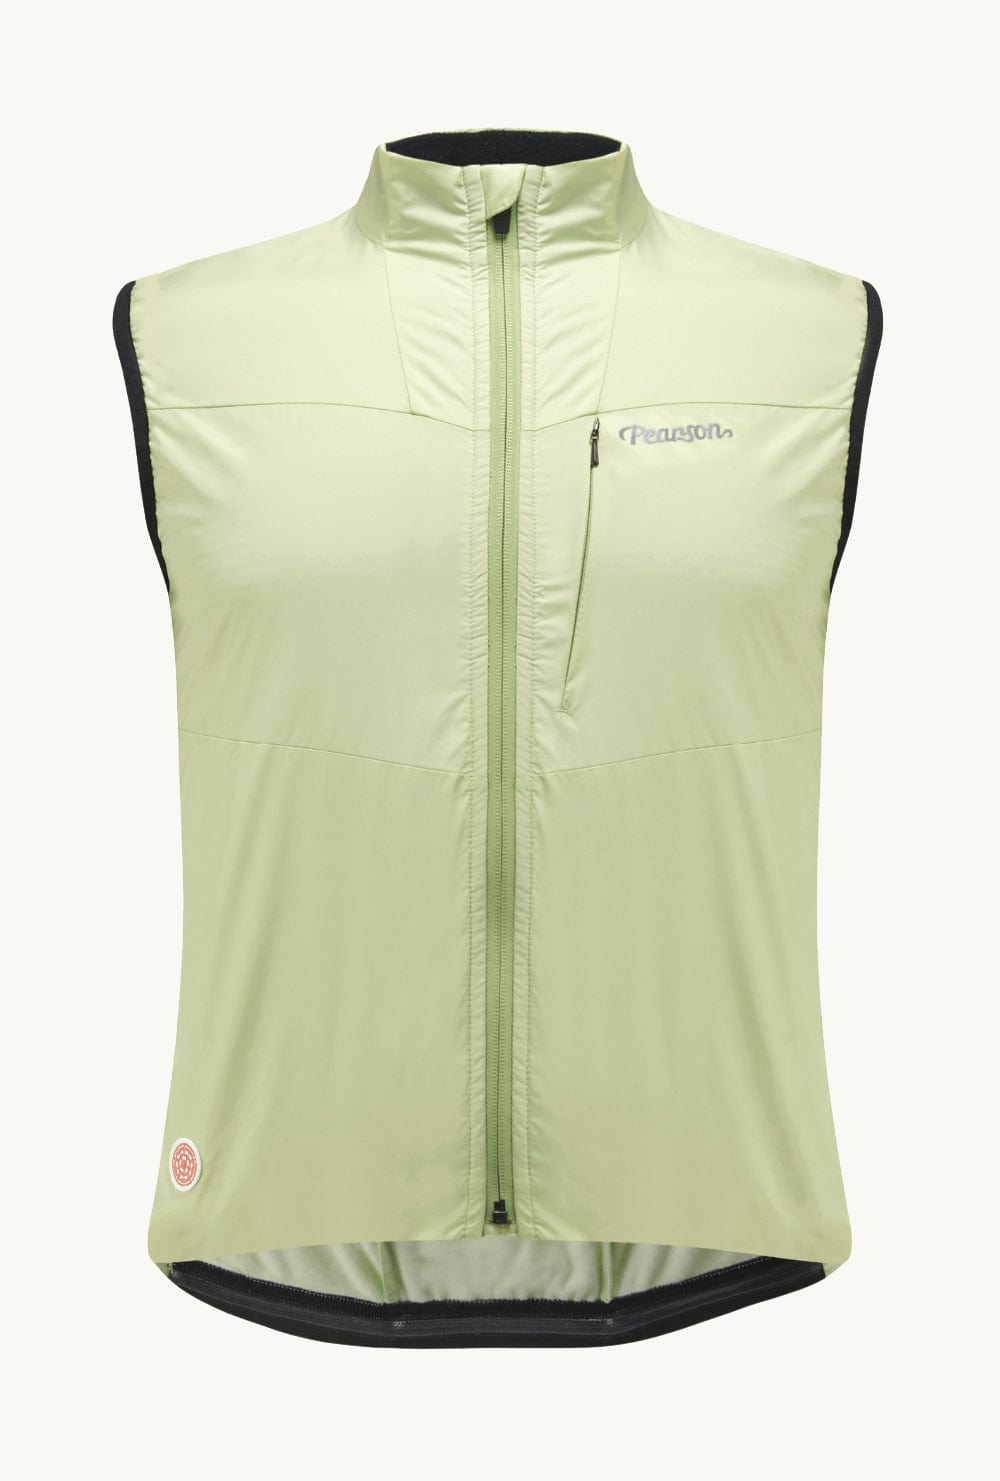 Pearson Cycles Pearson 1860, Feel the Benefits - Polartec® Insulated Gilet Shadow Lime, Small / Shadow Lime